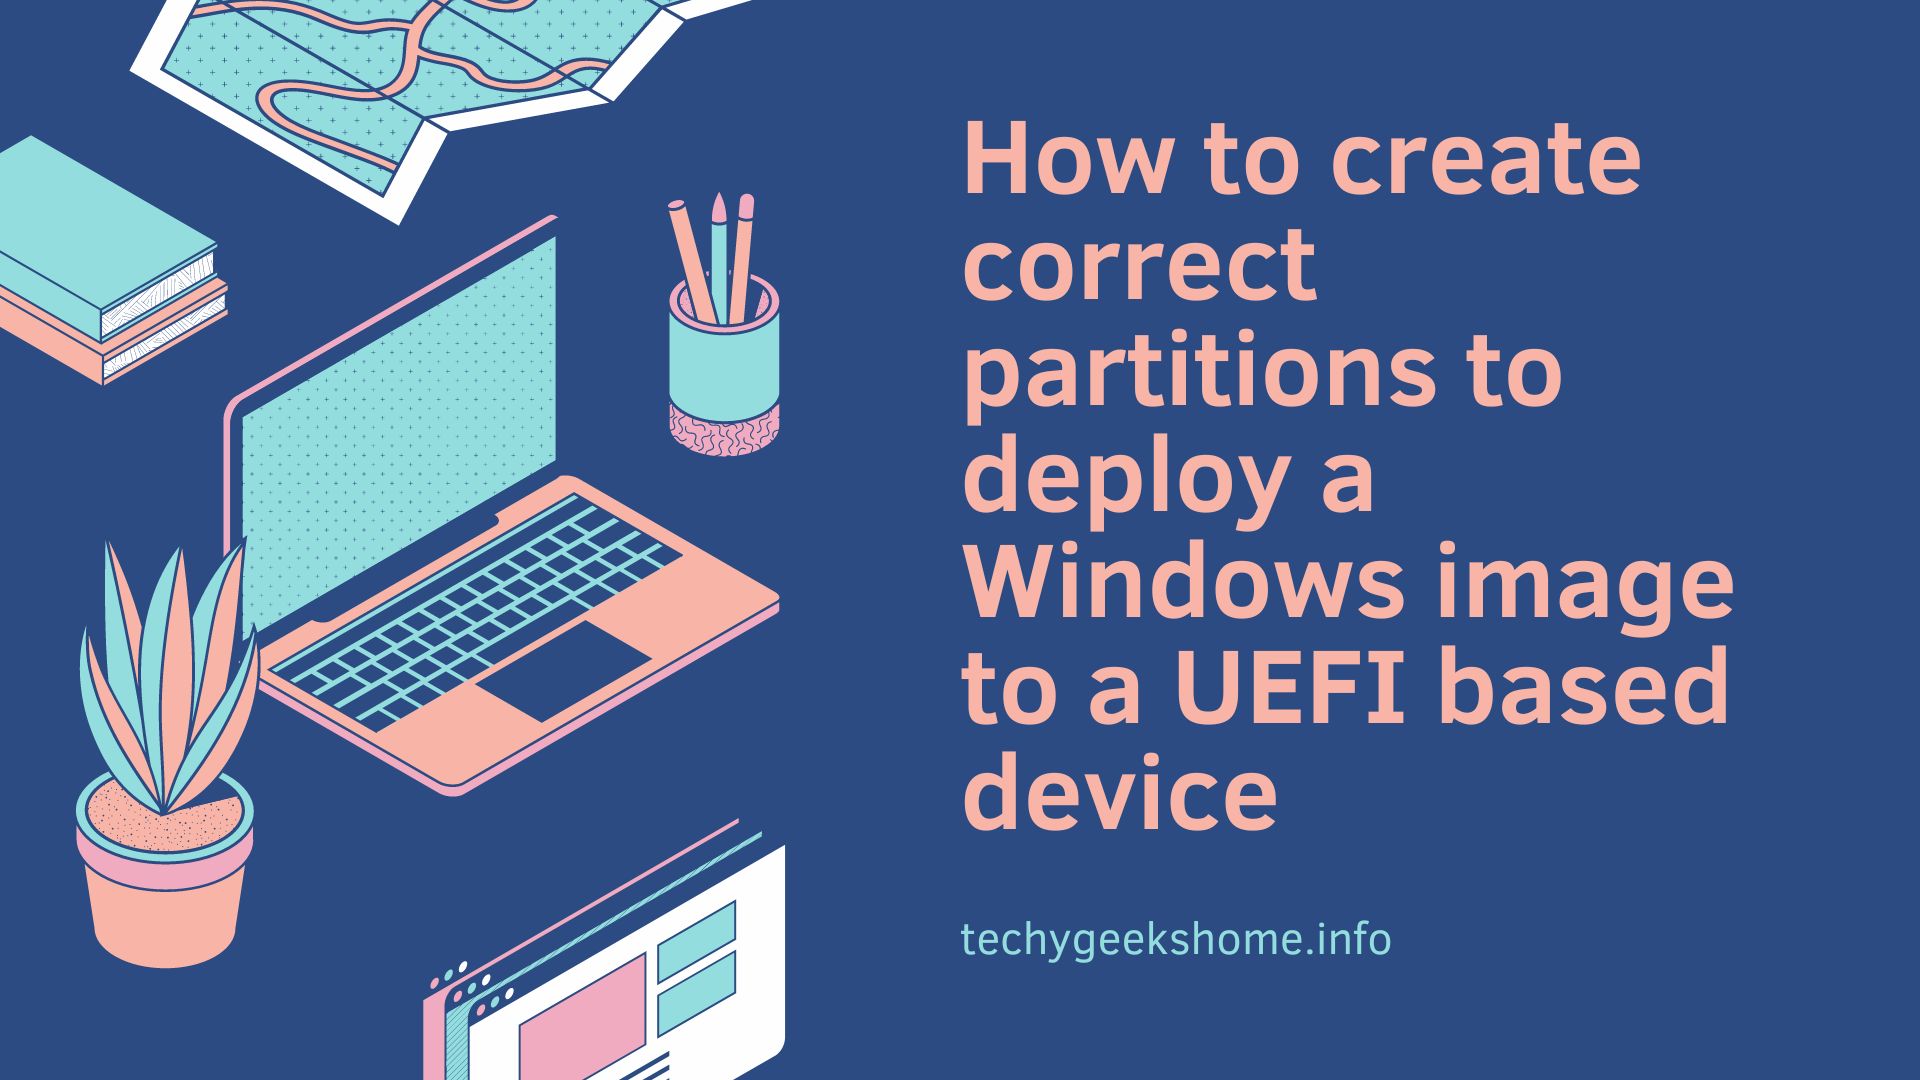 How to create correct partitions to deploy a Windows image to a UEFI based device